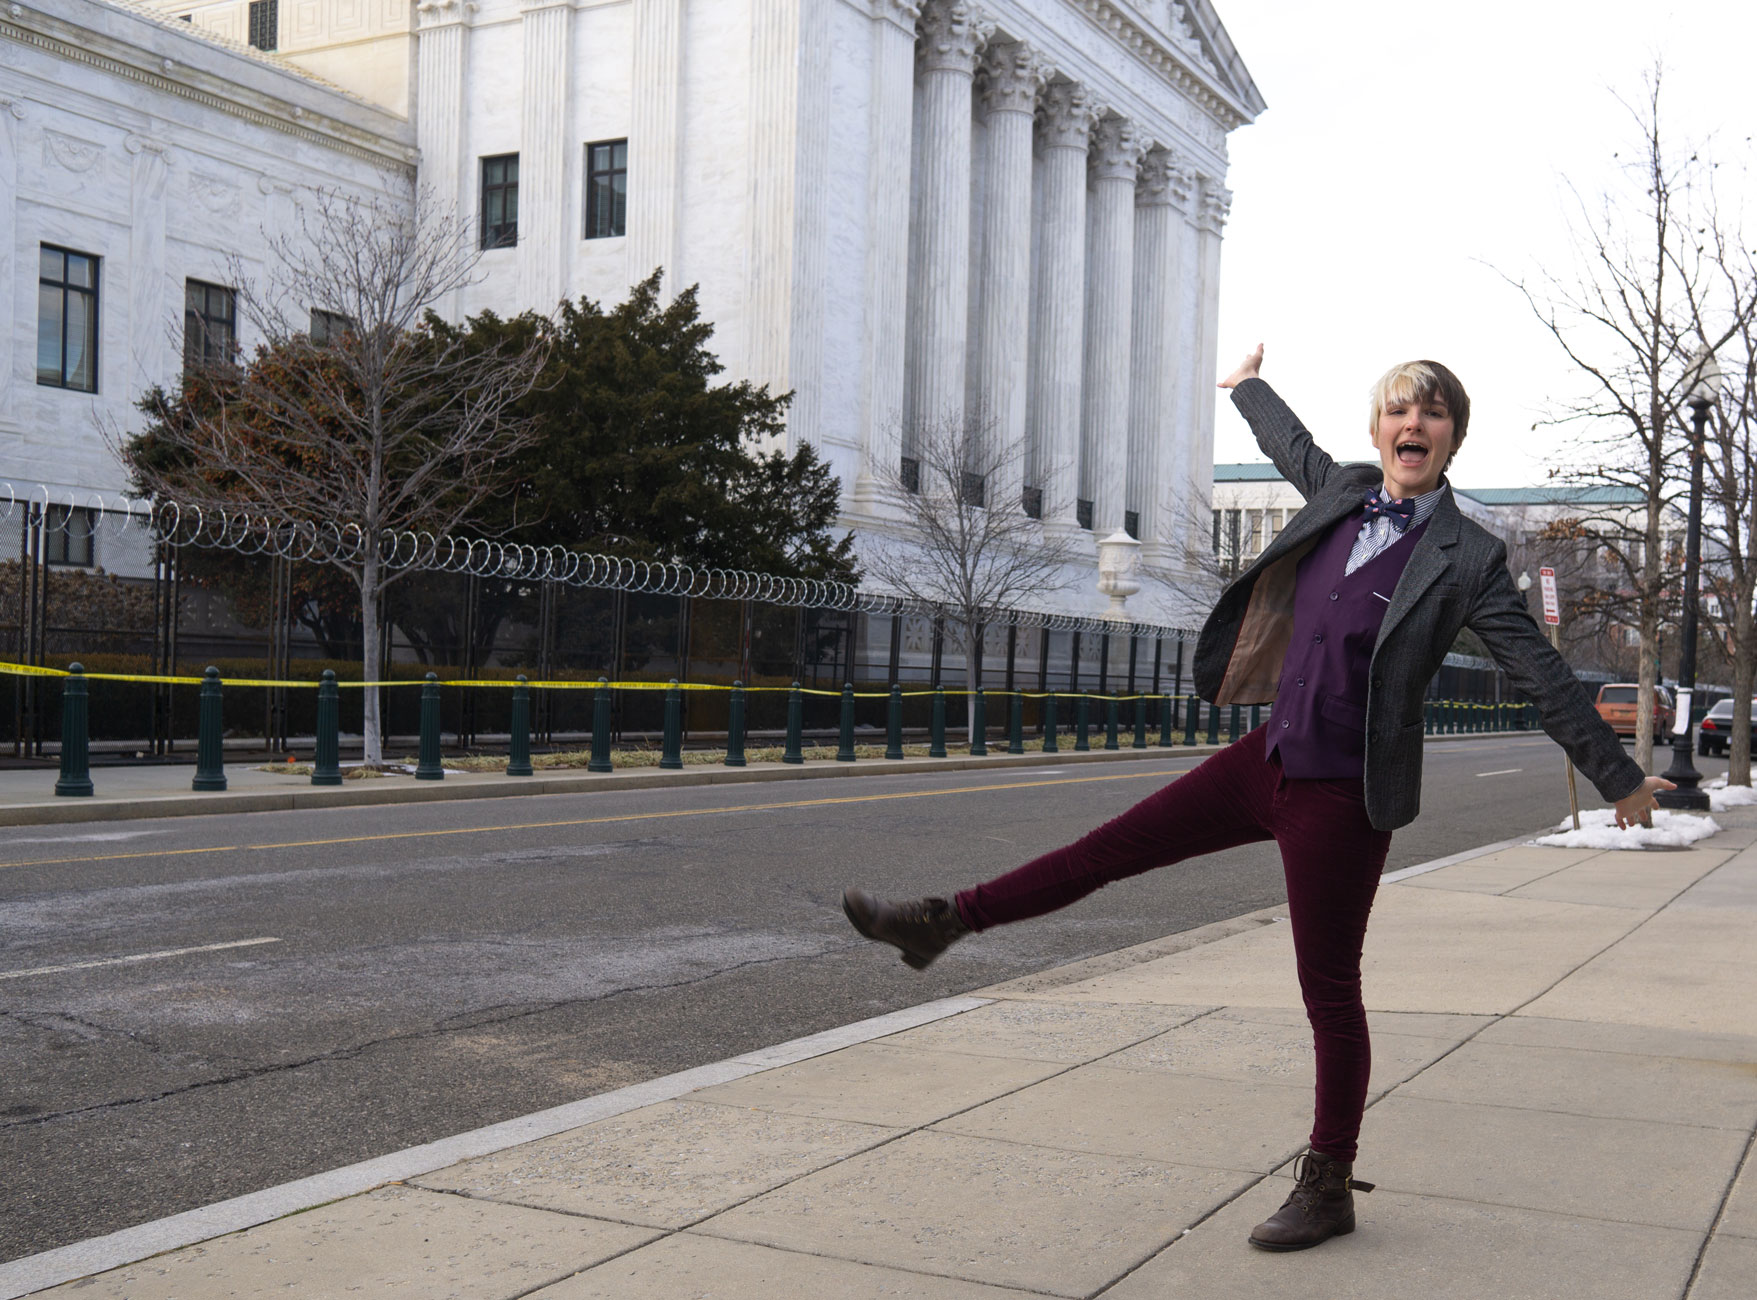 B kicks up a leg in an enthusiastic pose in front of the iconic columns of the Supreme Court, fenced in with the rest of the capitol compound with barbed wire and armed guards in response to the January 6th attack on the capitol.